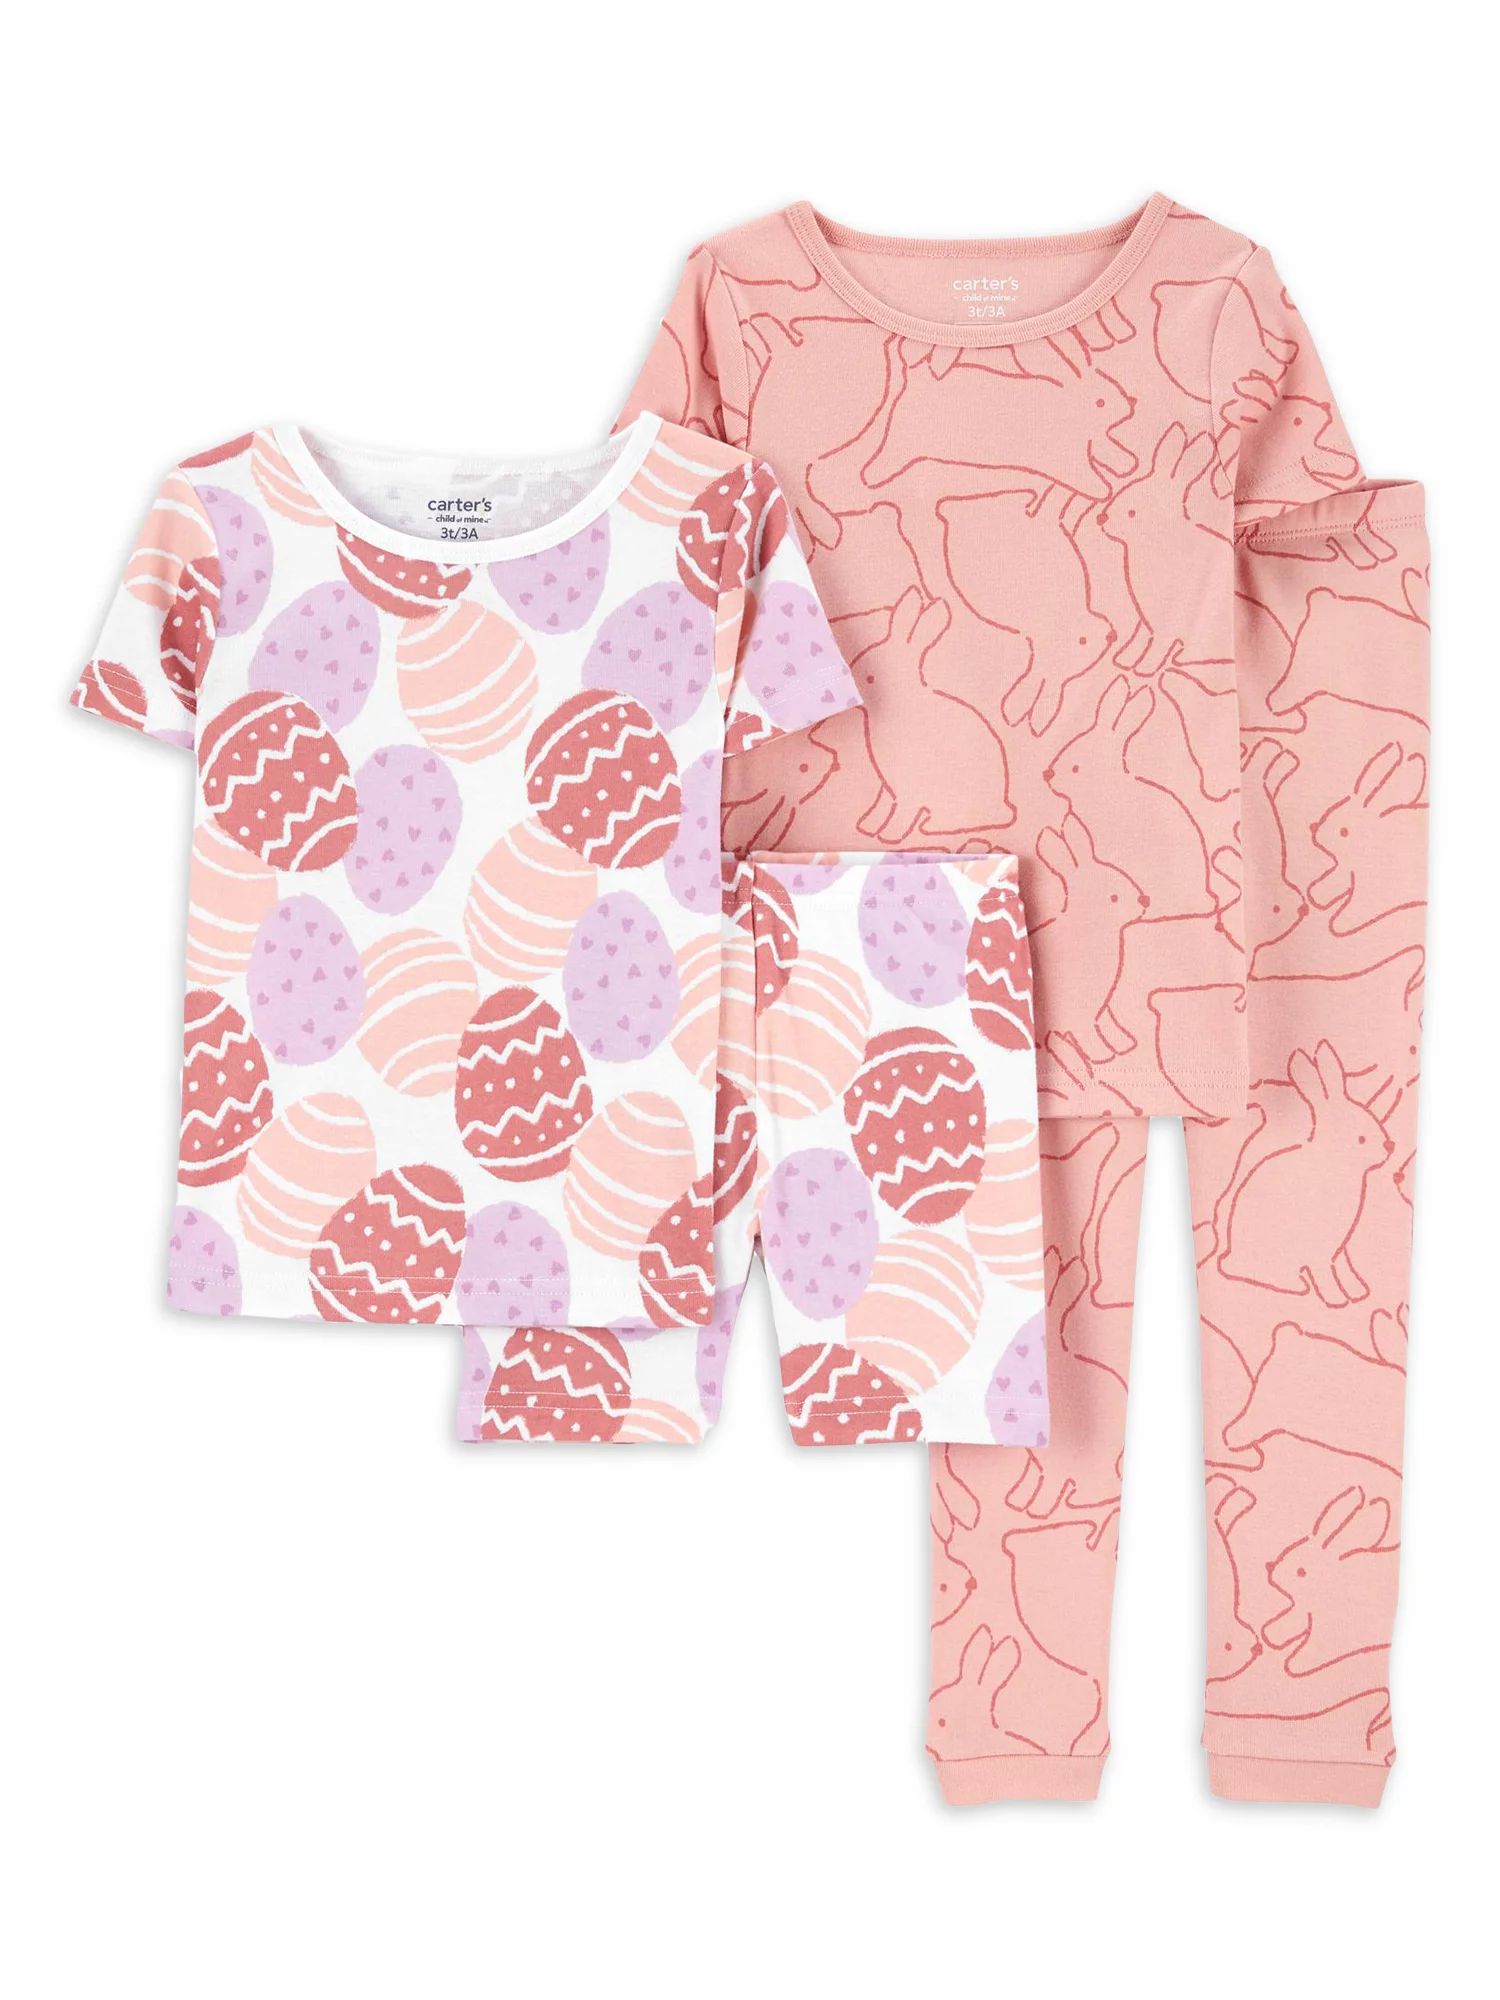 Carter's Child of Mine Baby and Toddler Girl Easter Pajama Set, 4-Piece, Sizes 12M-5T | Walmart (US)